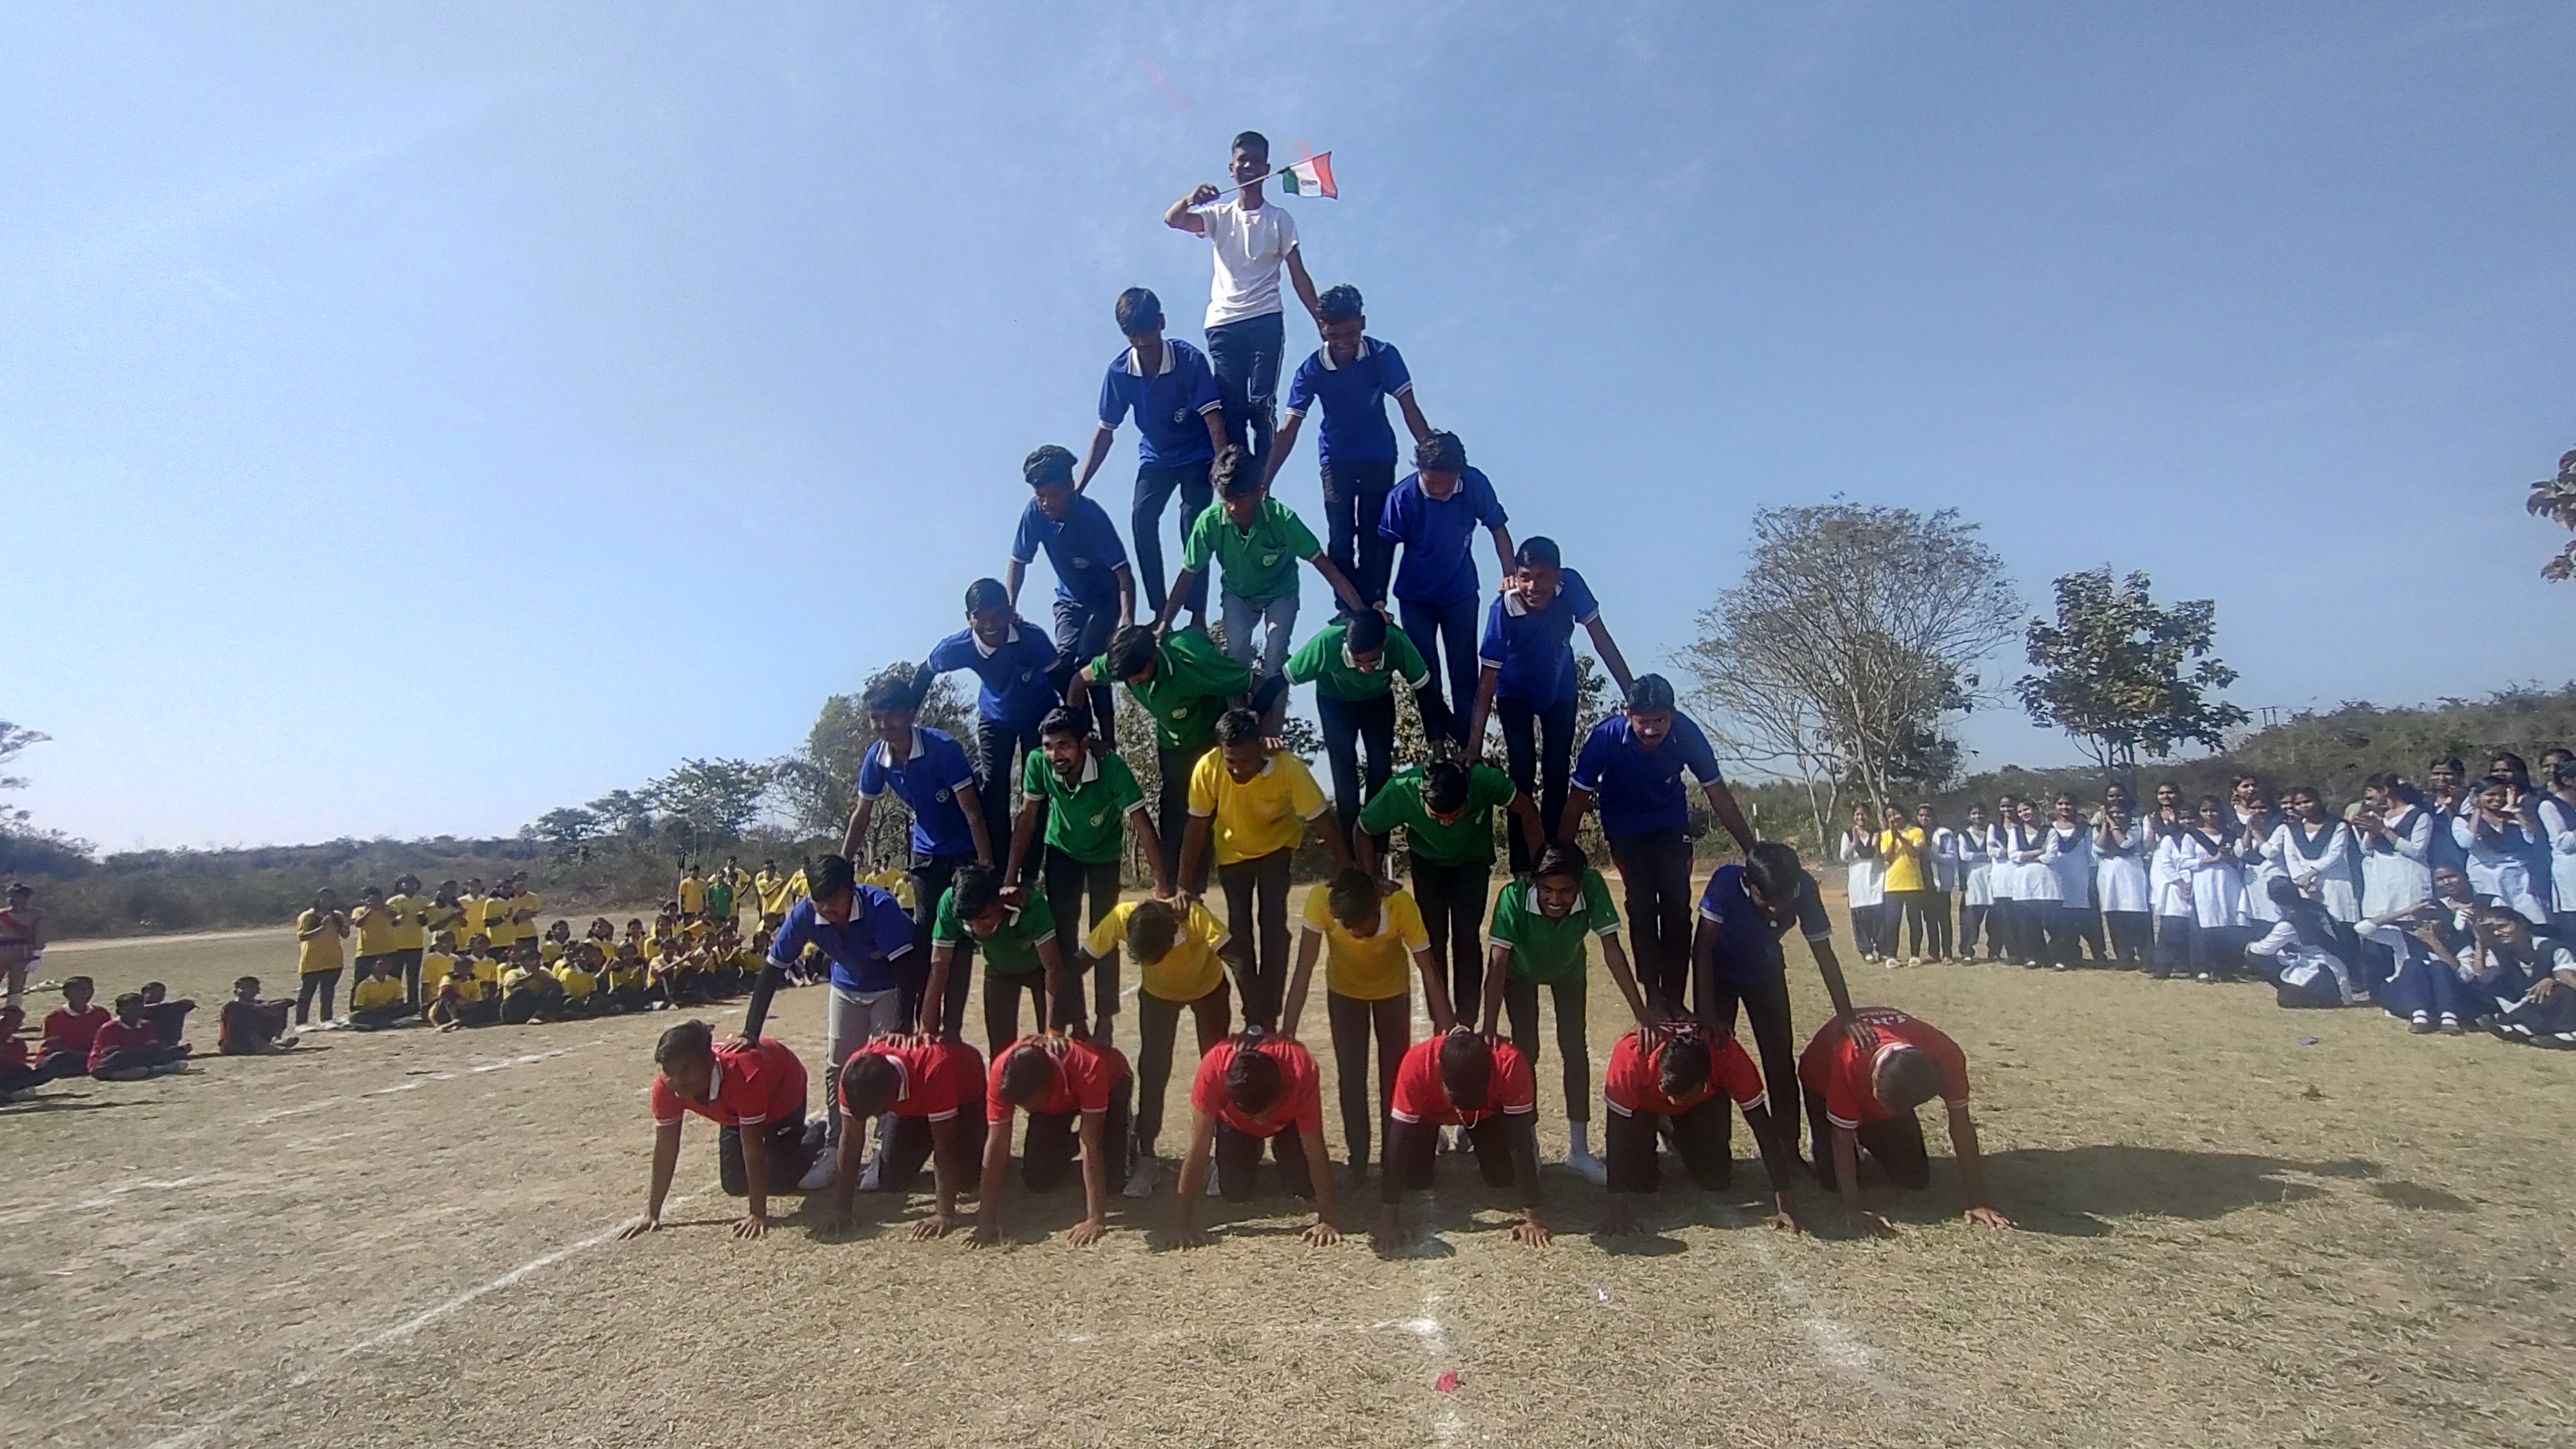 Pyramid shape by students on the occasion of 26th january